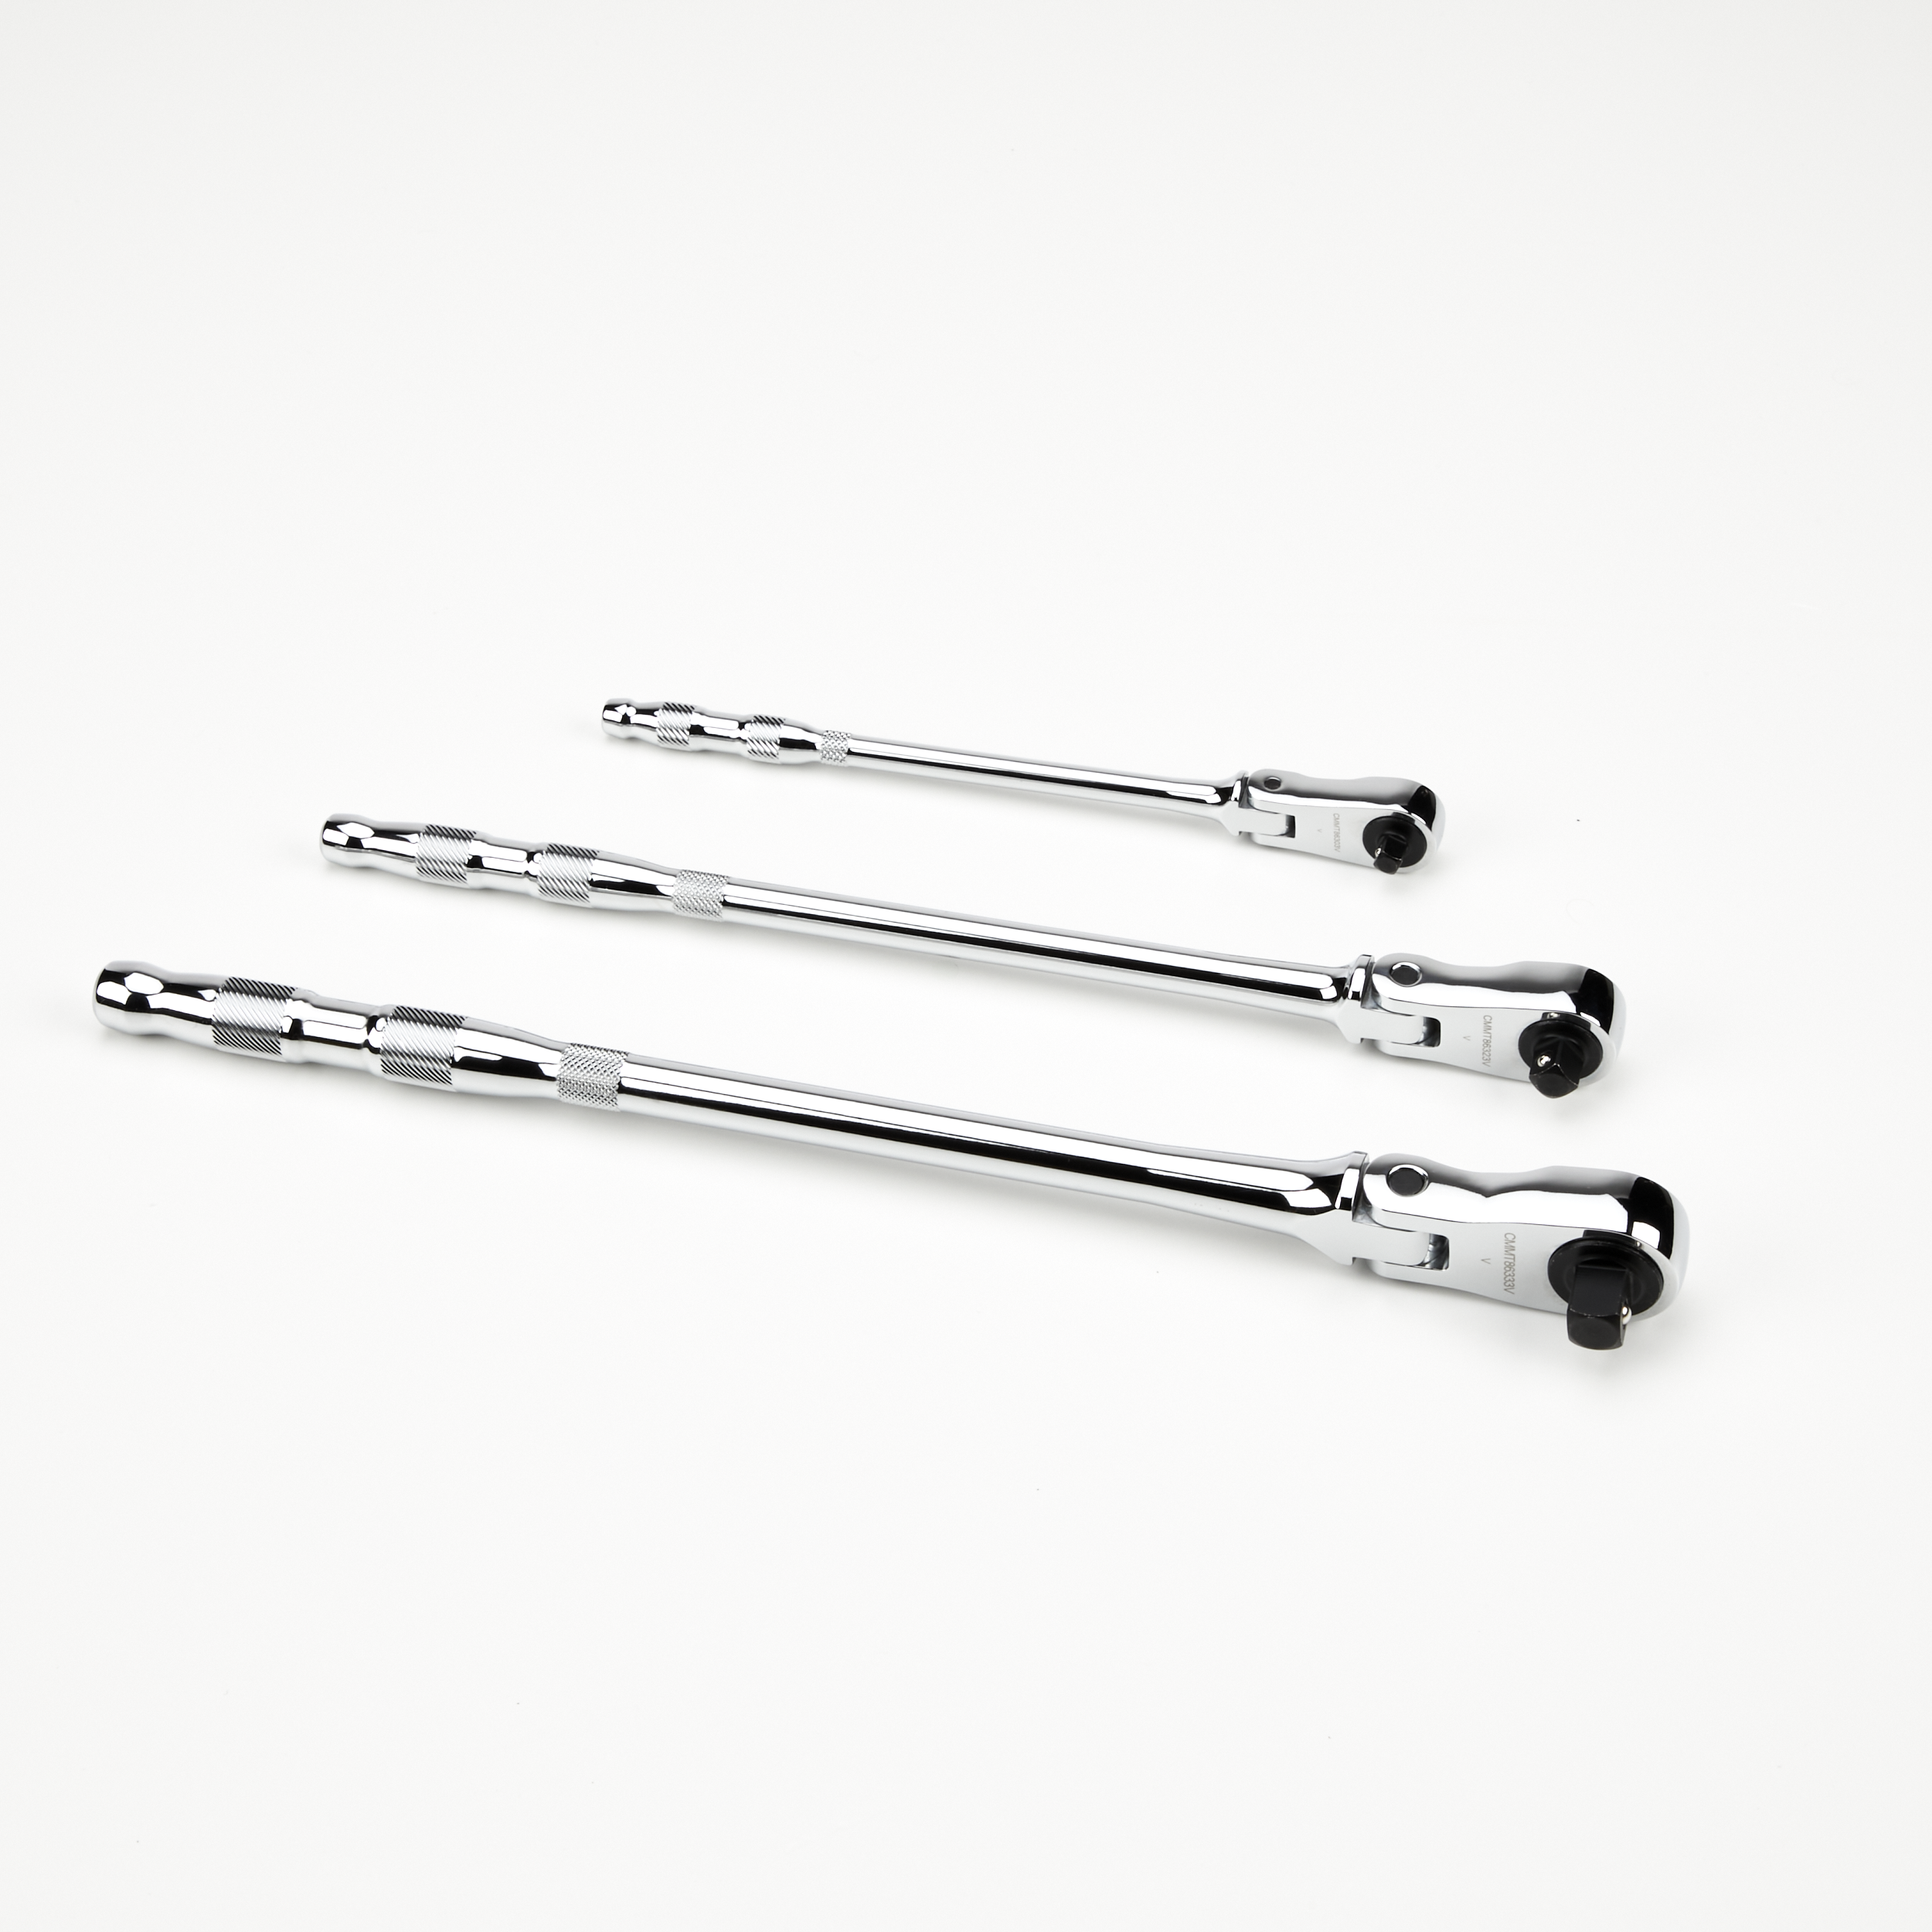 V-Series™ 1/4 in, 3/8 in, and 1/2 in Drive Long Flex Head Ratchet (3 P  CRAFTSMAN